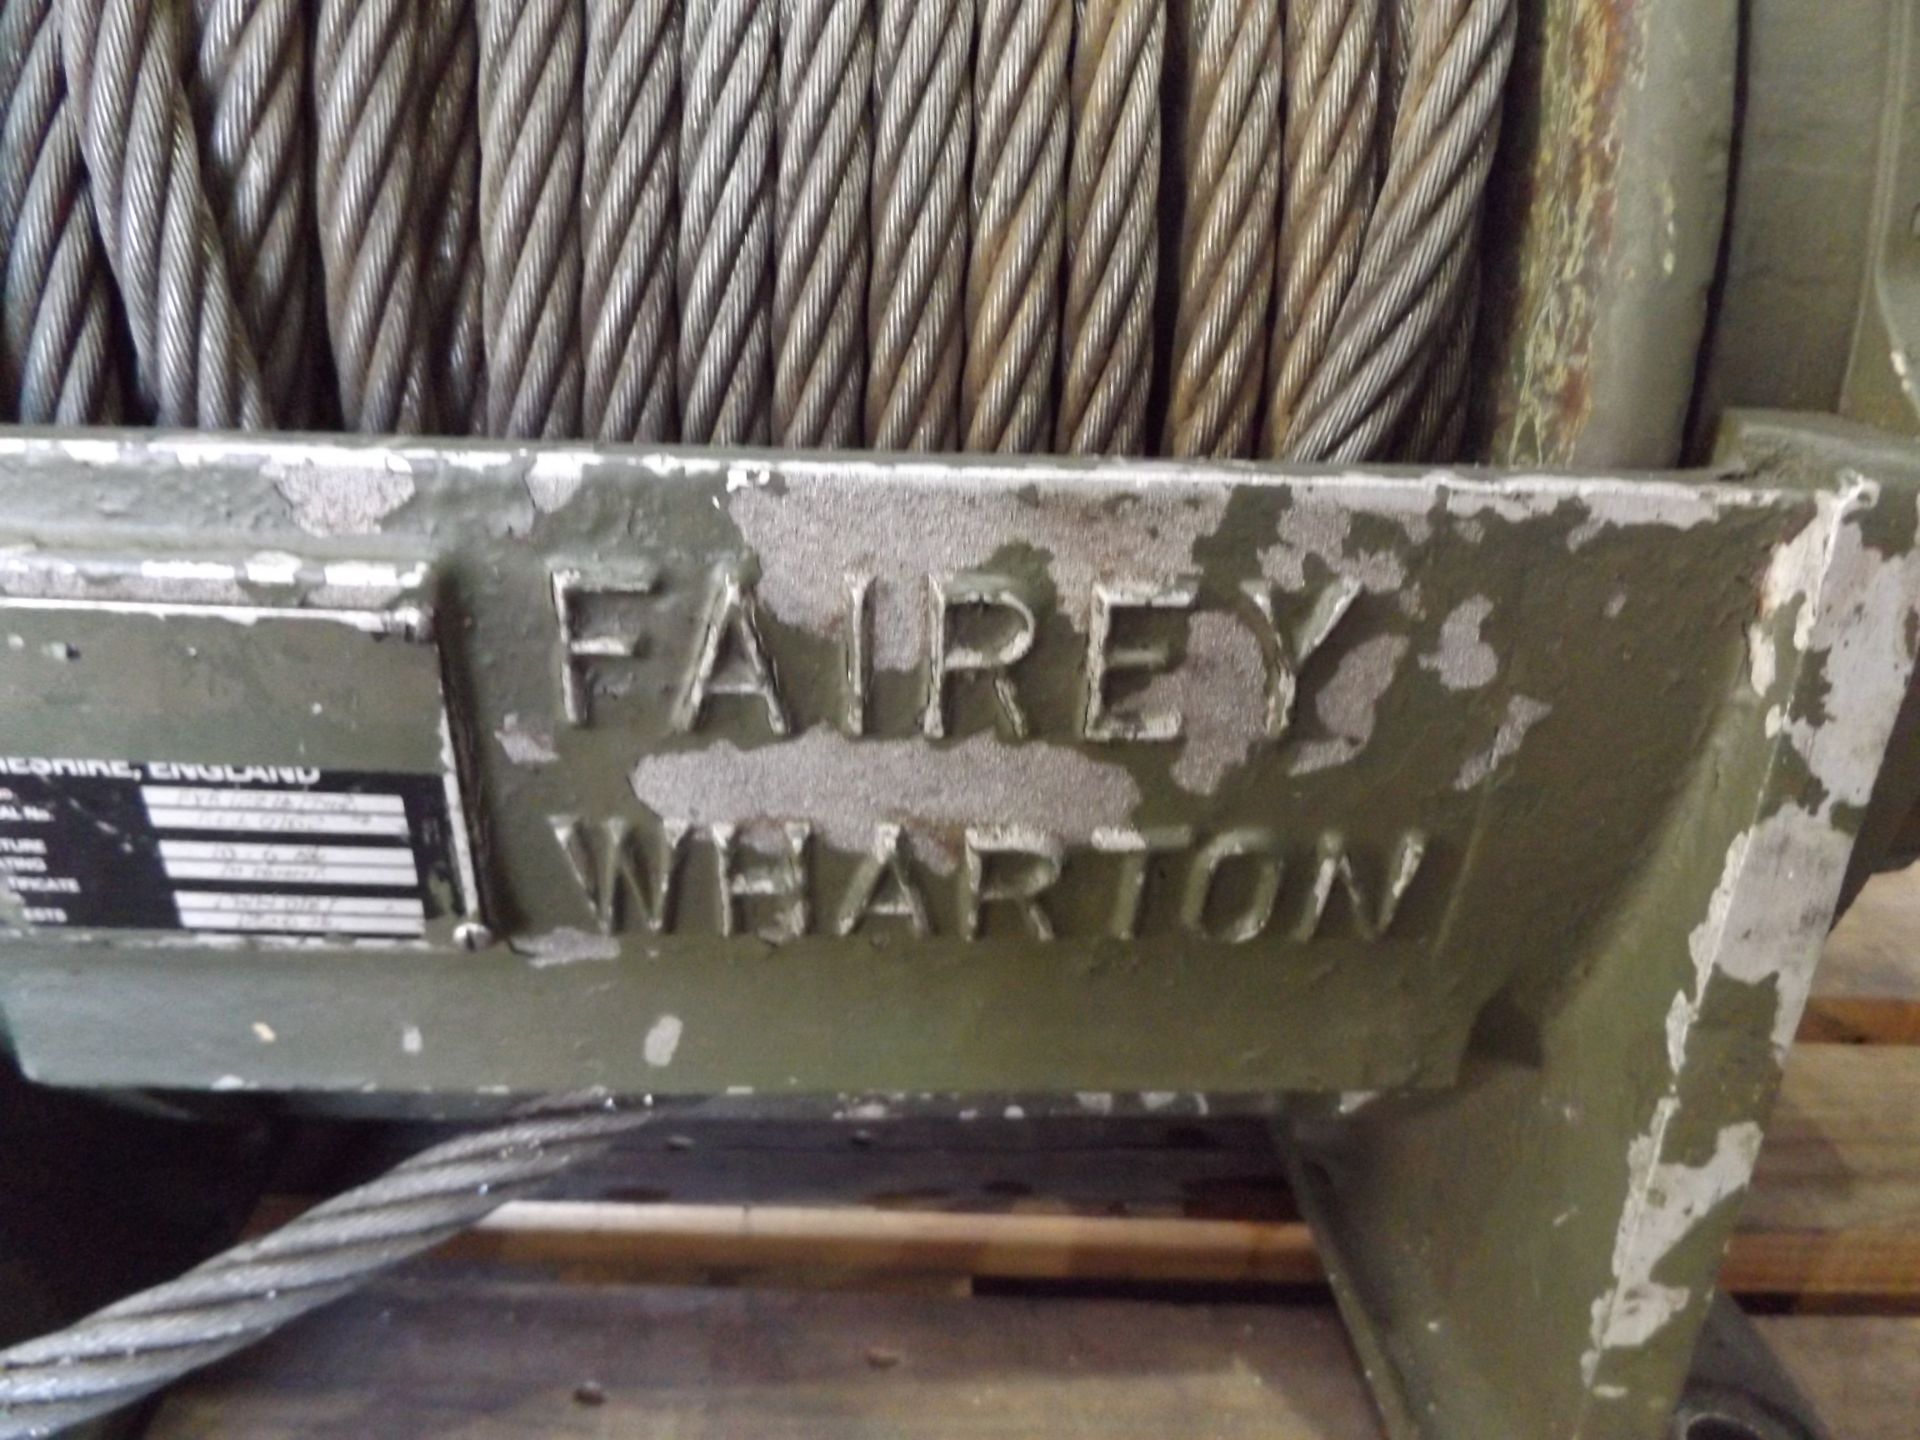 Fairey Wharton 10 ton Recovery Vehicle Mounted Mechanical Winch Drum - Image 6 of 8